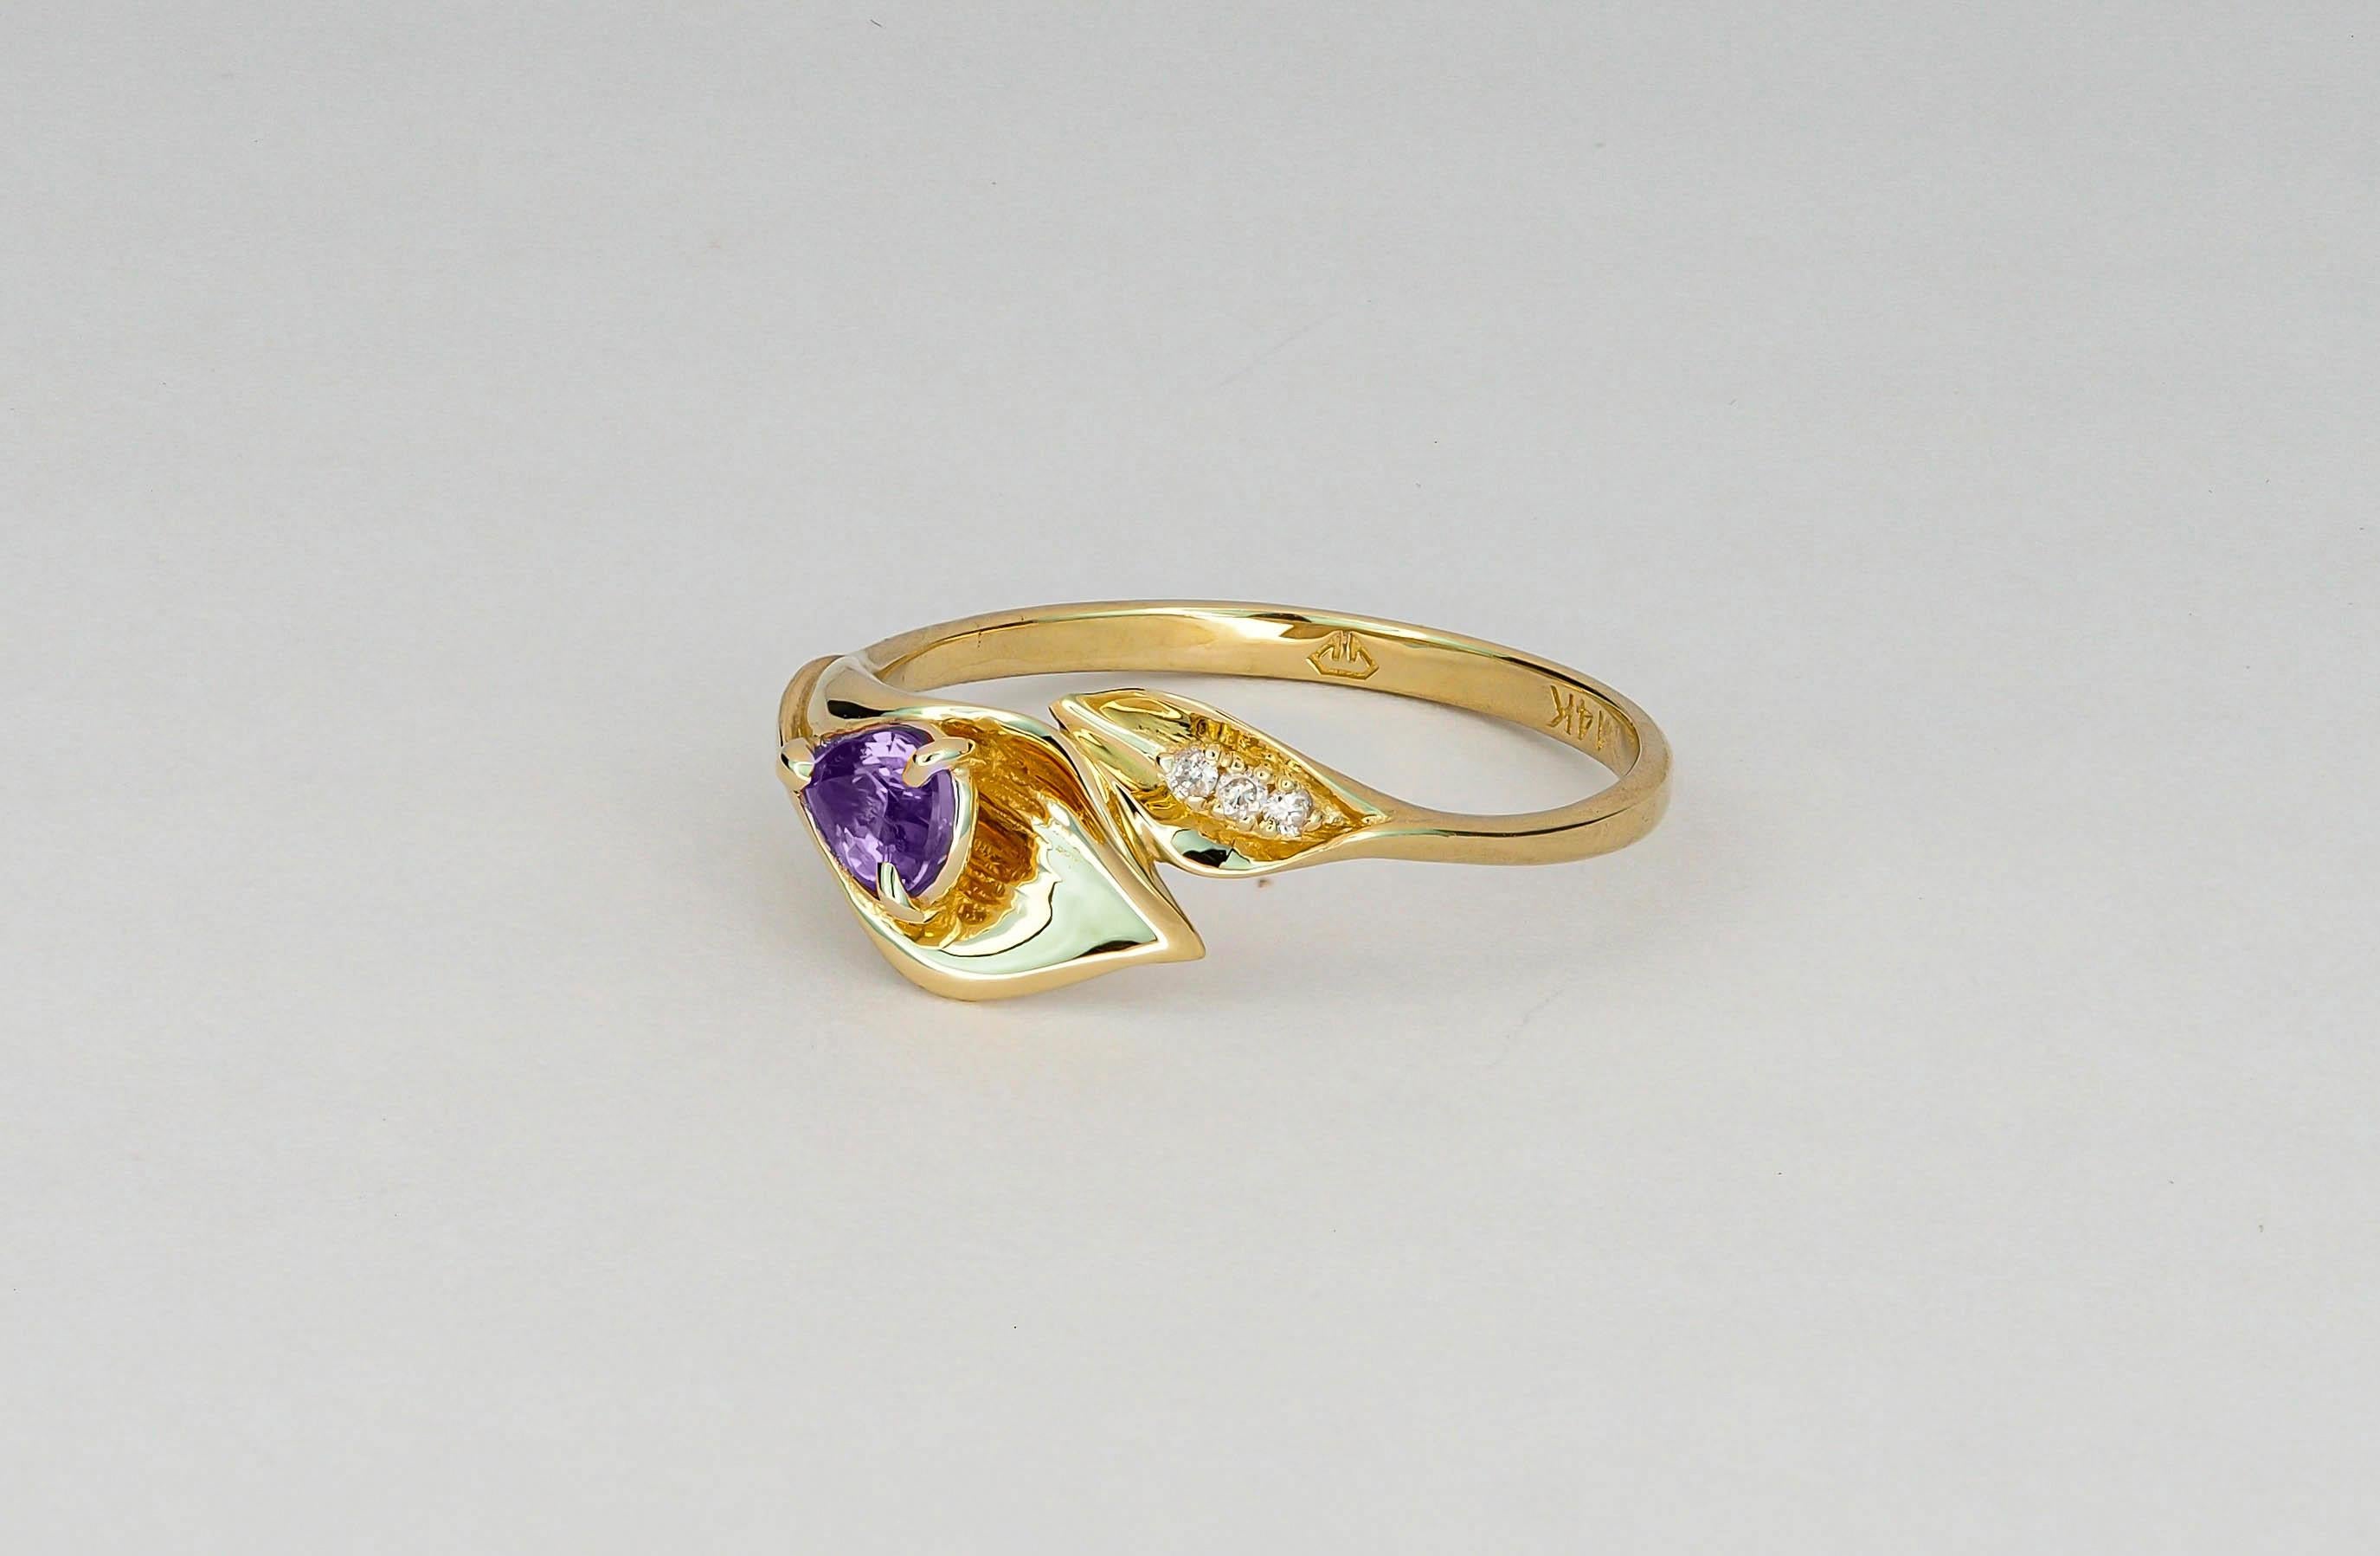 Pear Cut Lily Calla Gold Ring, 14 Karat Gold Ring with Amethyst and Diamonds